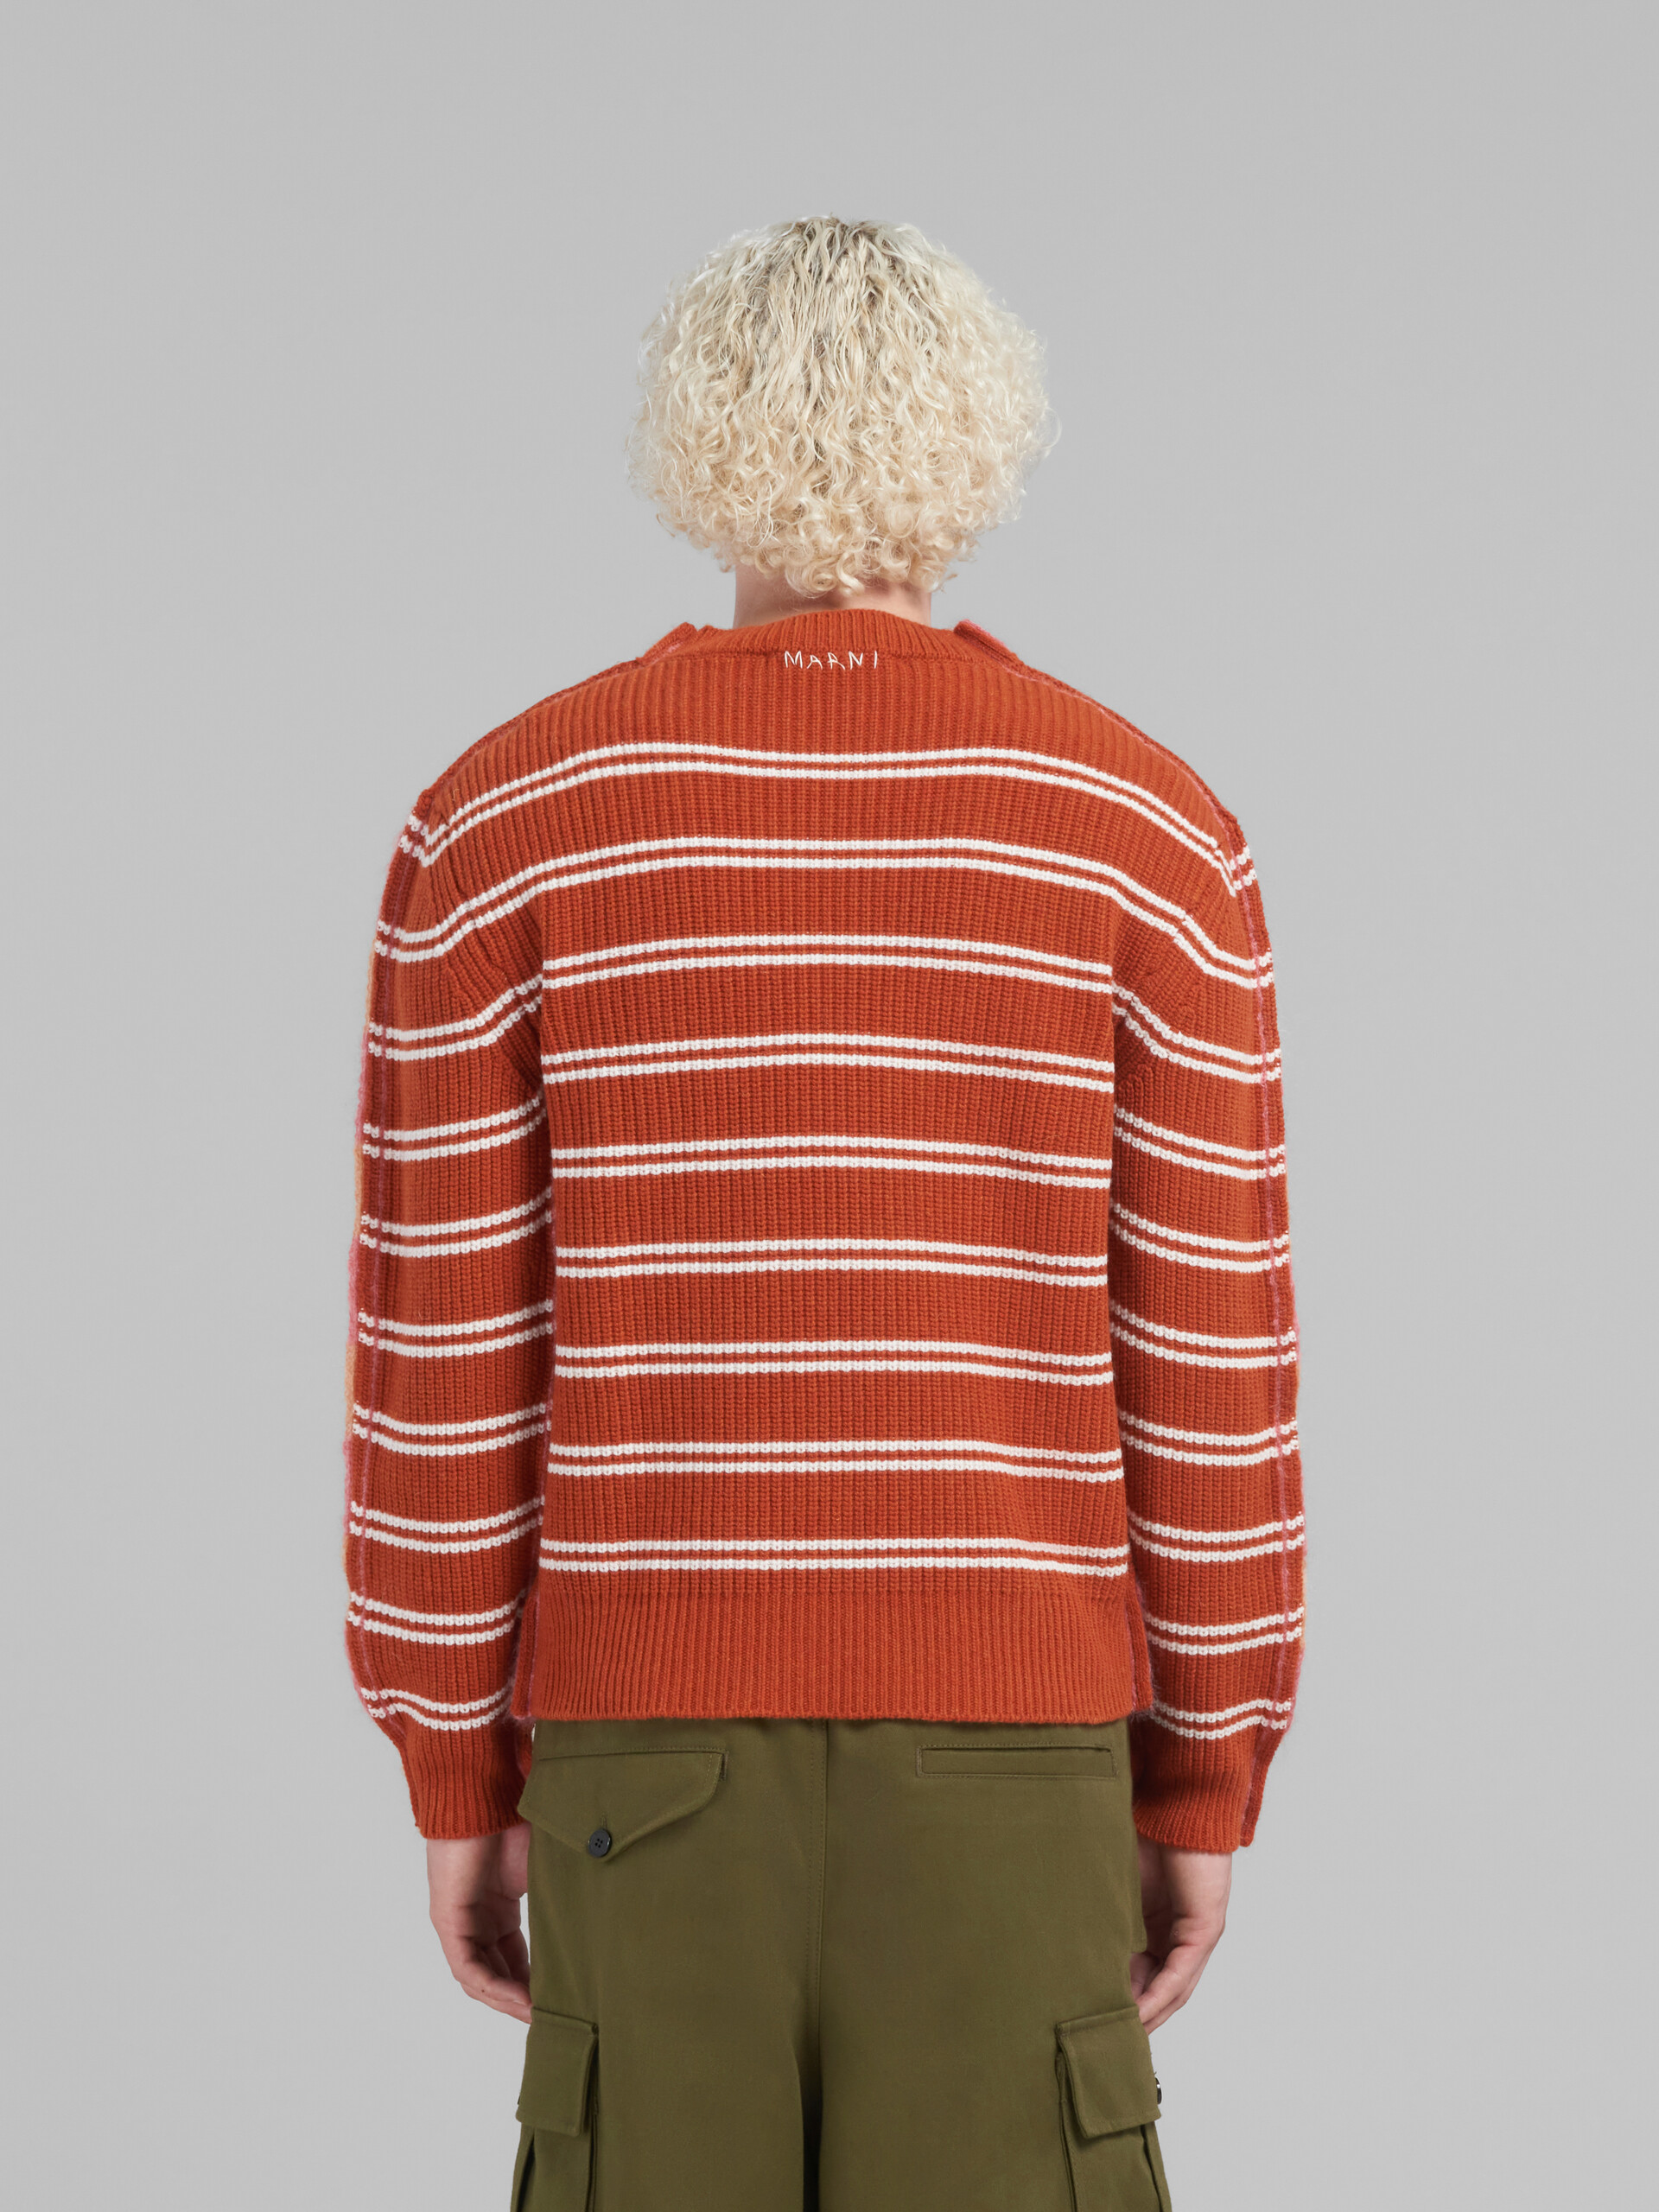 Green mohair and wool jumper with mixed stripes - Pullovers - Image 3